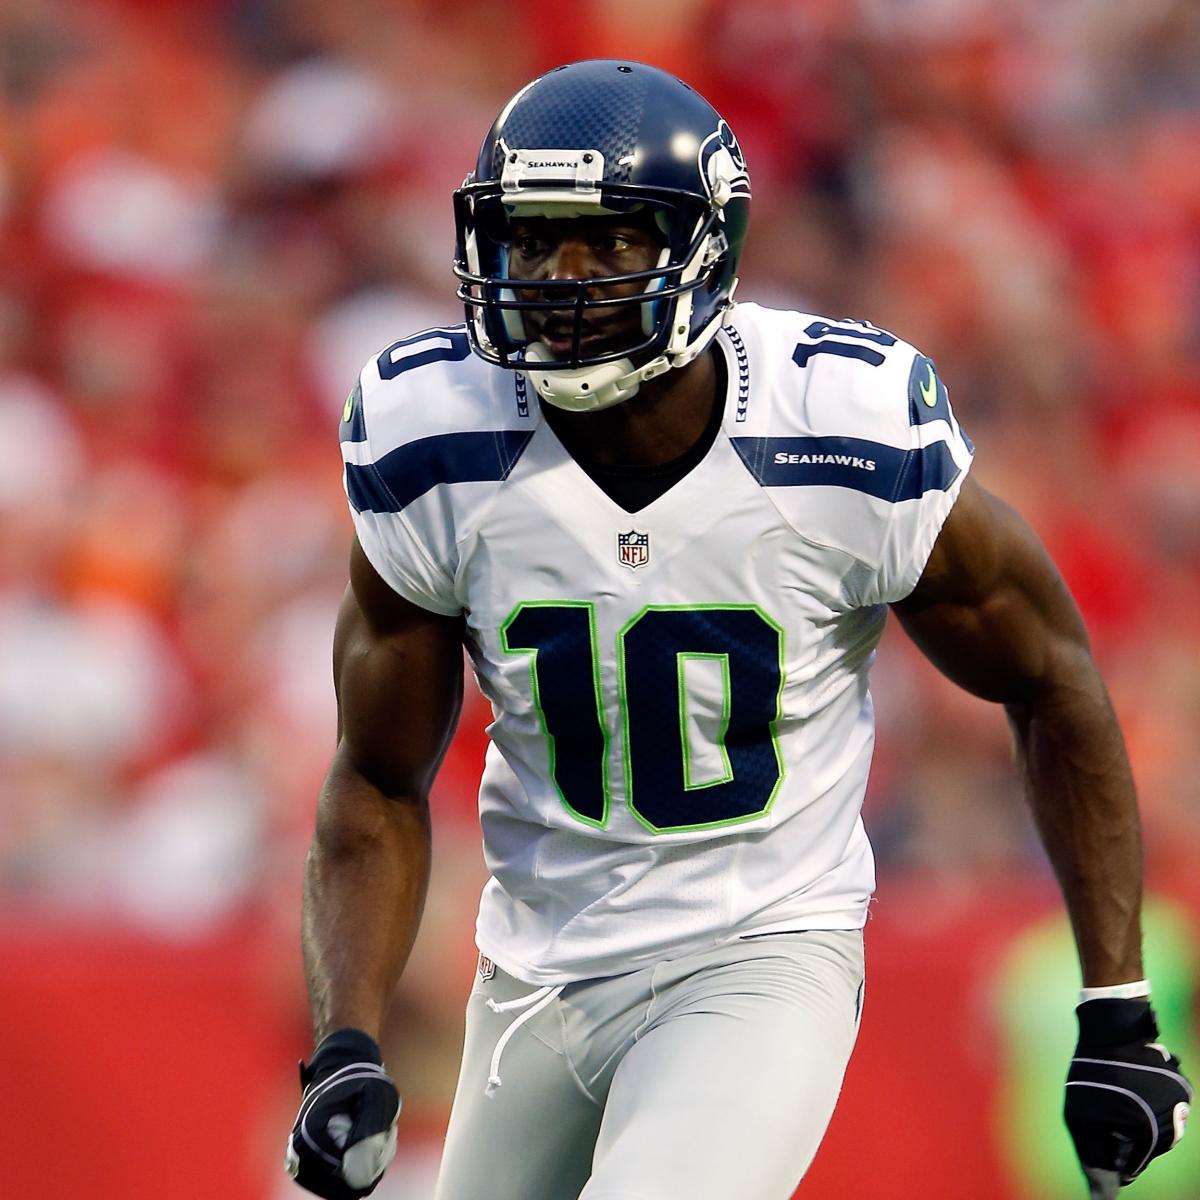 Terrell Owens Back in the NFL with the Seattle Seahawks